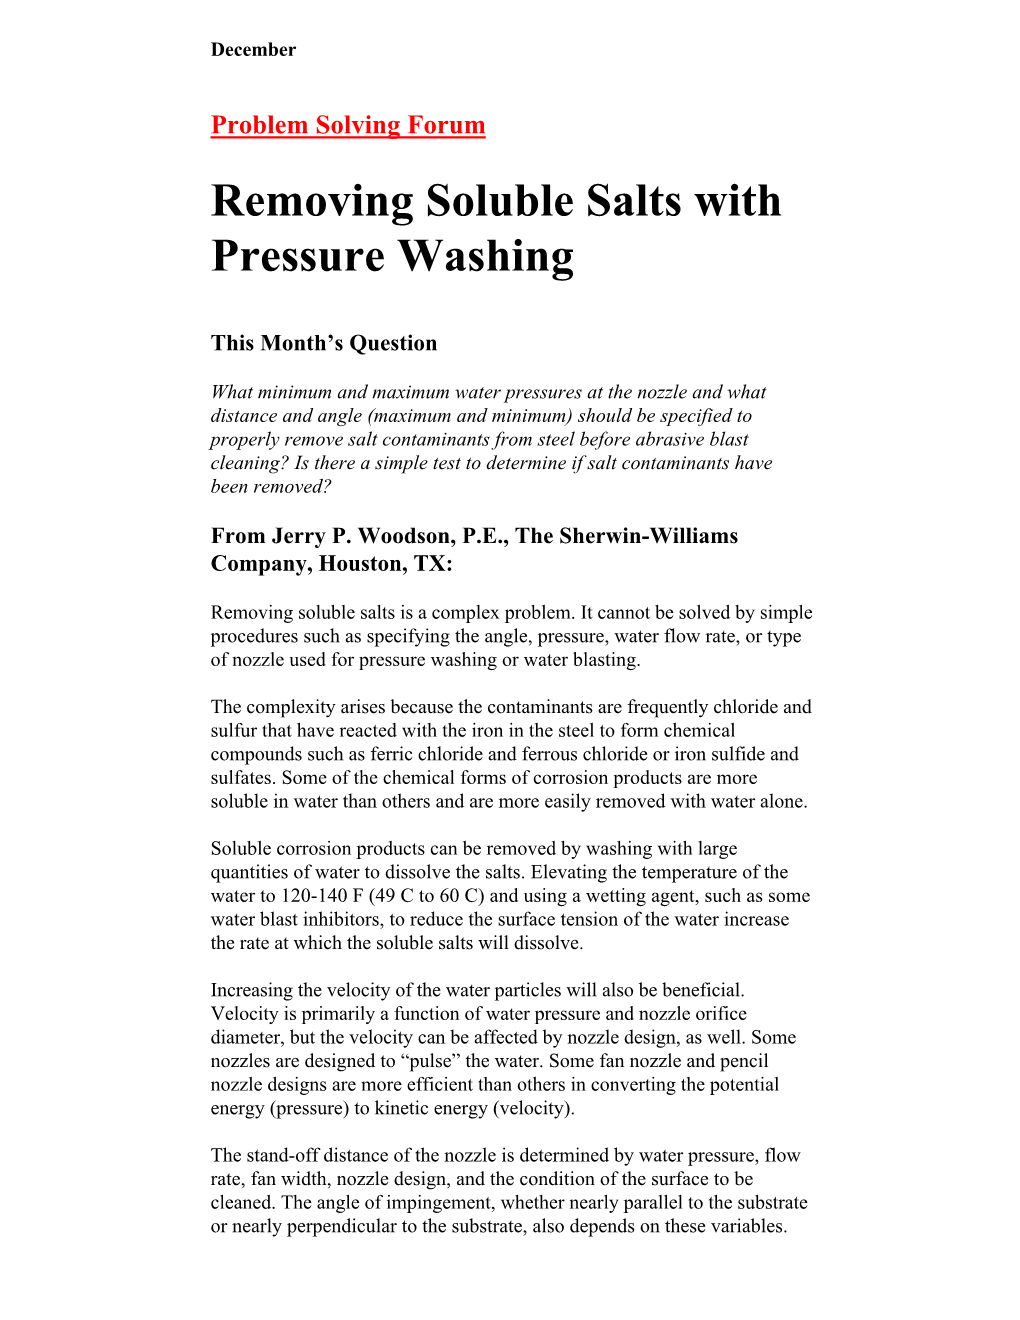 Removing Soluble Salts with Pressure Washing